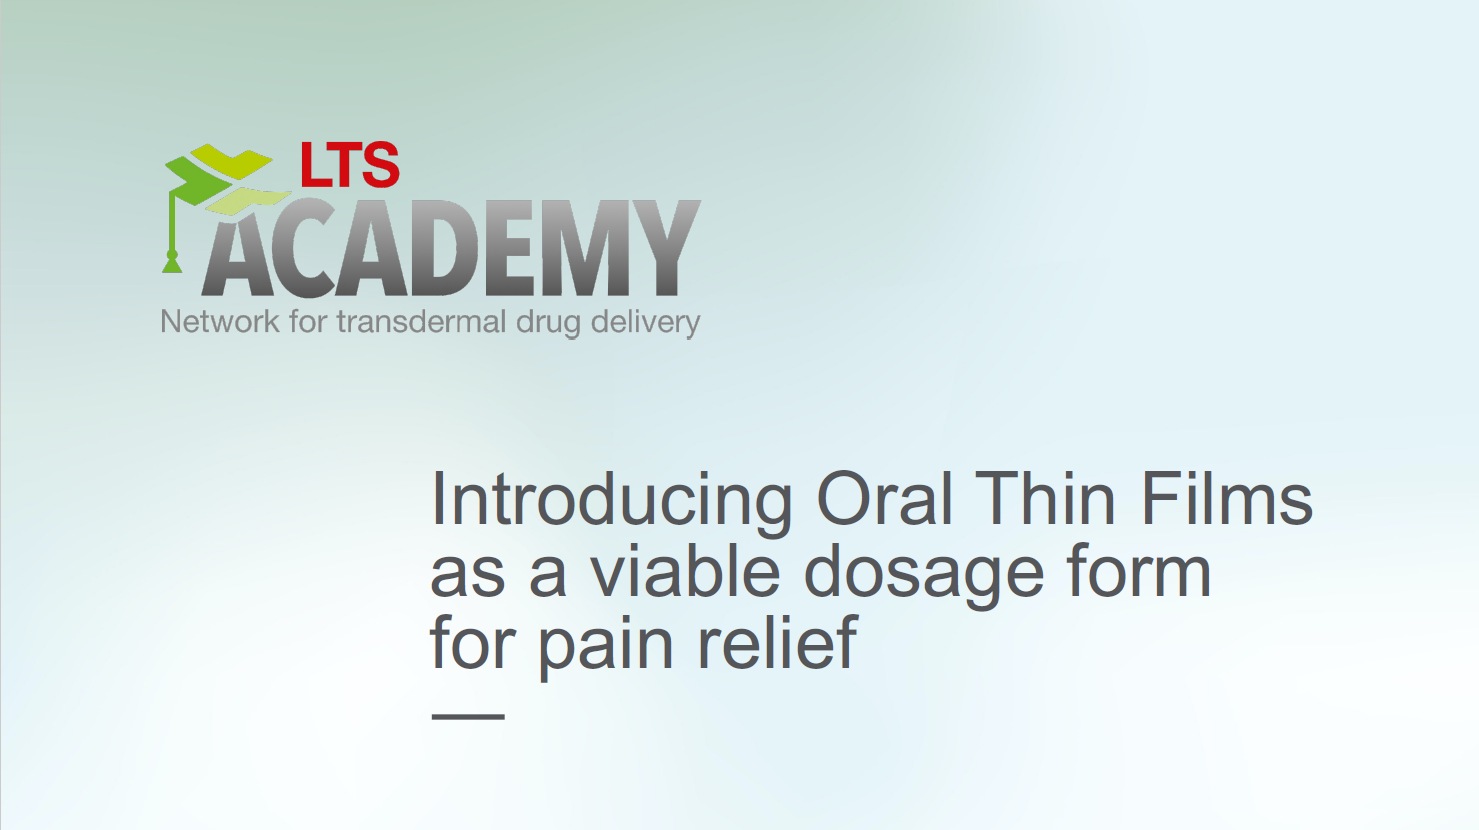 Introducing Oral Thin Films as a viable dosage form for a pain relief